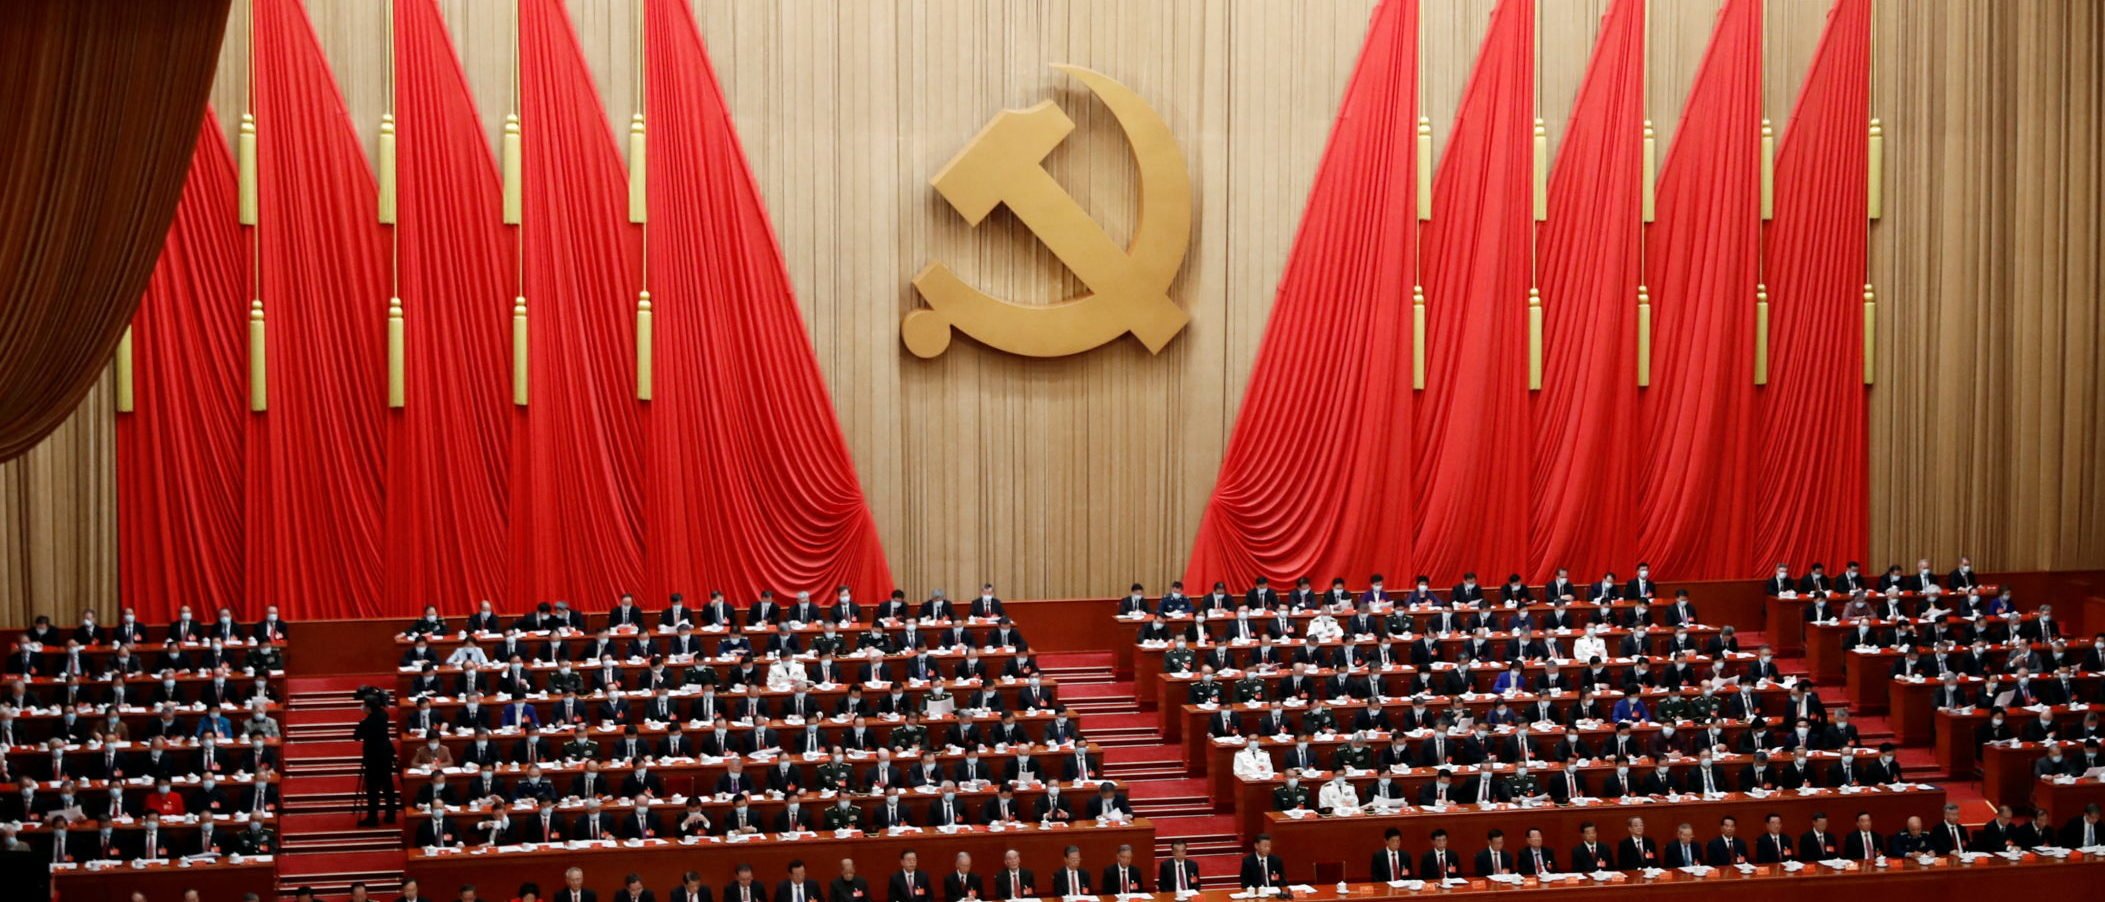 Delegates attend the closing ceremony of the 20th National Congress of the Communist Party of China, at the Great Hall of the People in Beijing, China October 22, 2022. REUTERS/Tingshu Wang